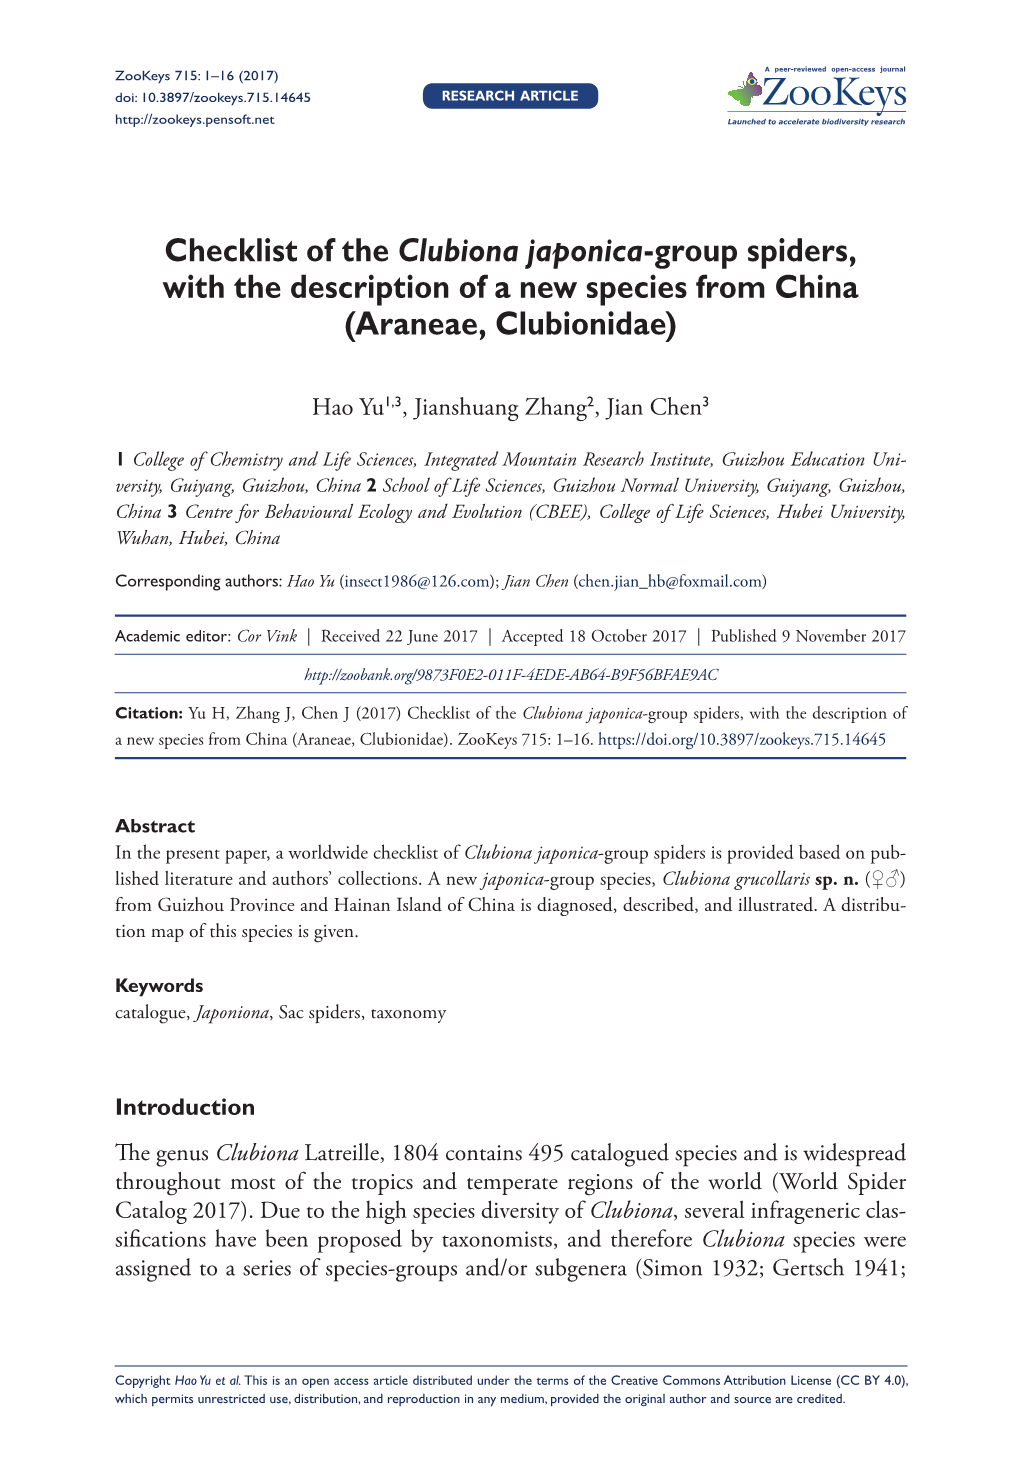 Checklist of the Clubiona Japonica-Group Spiders, with the Description of a New Species from China (Araneae, Clubionidae)